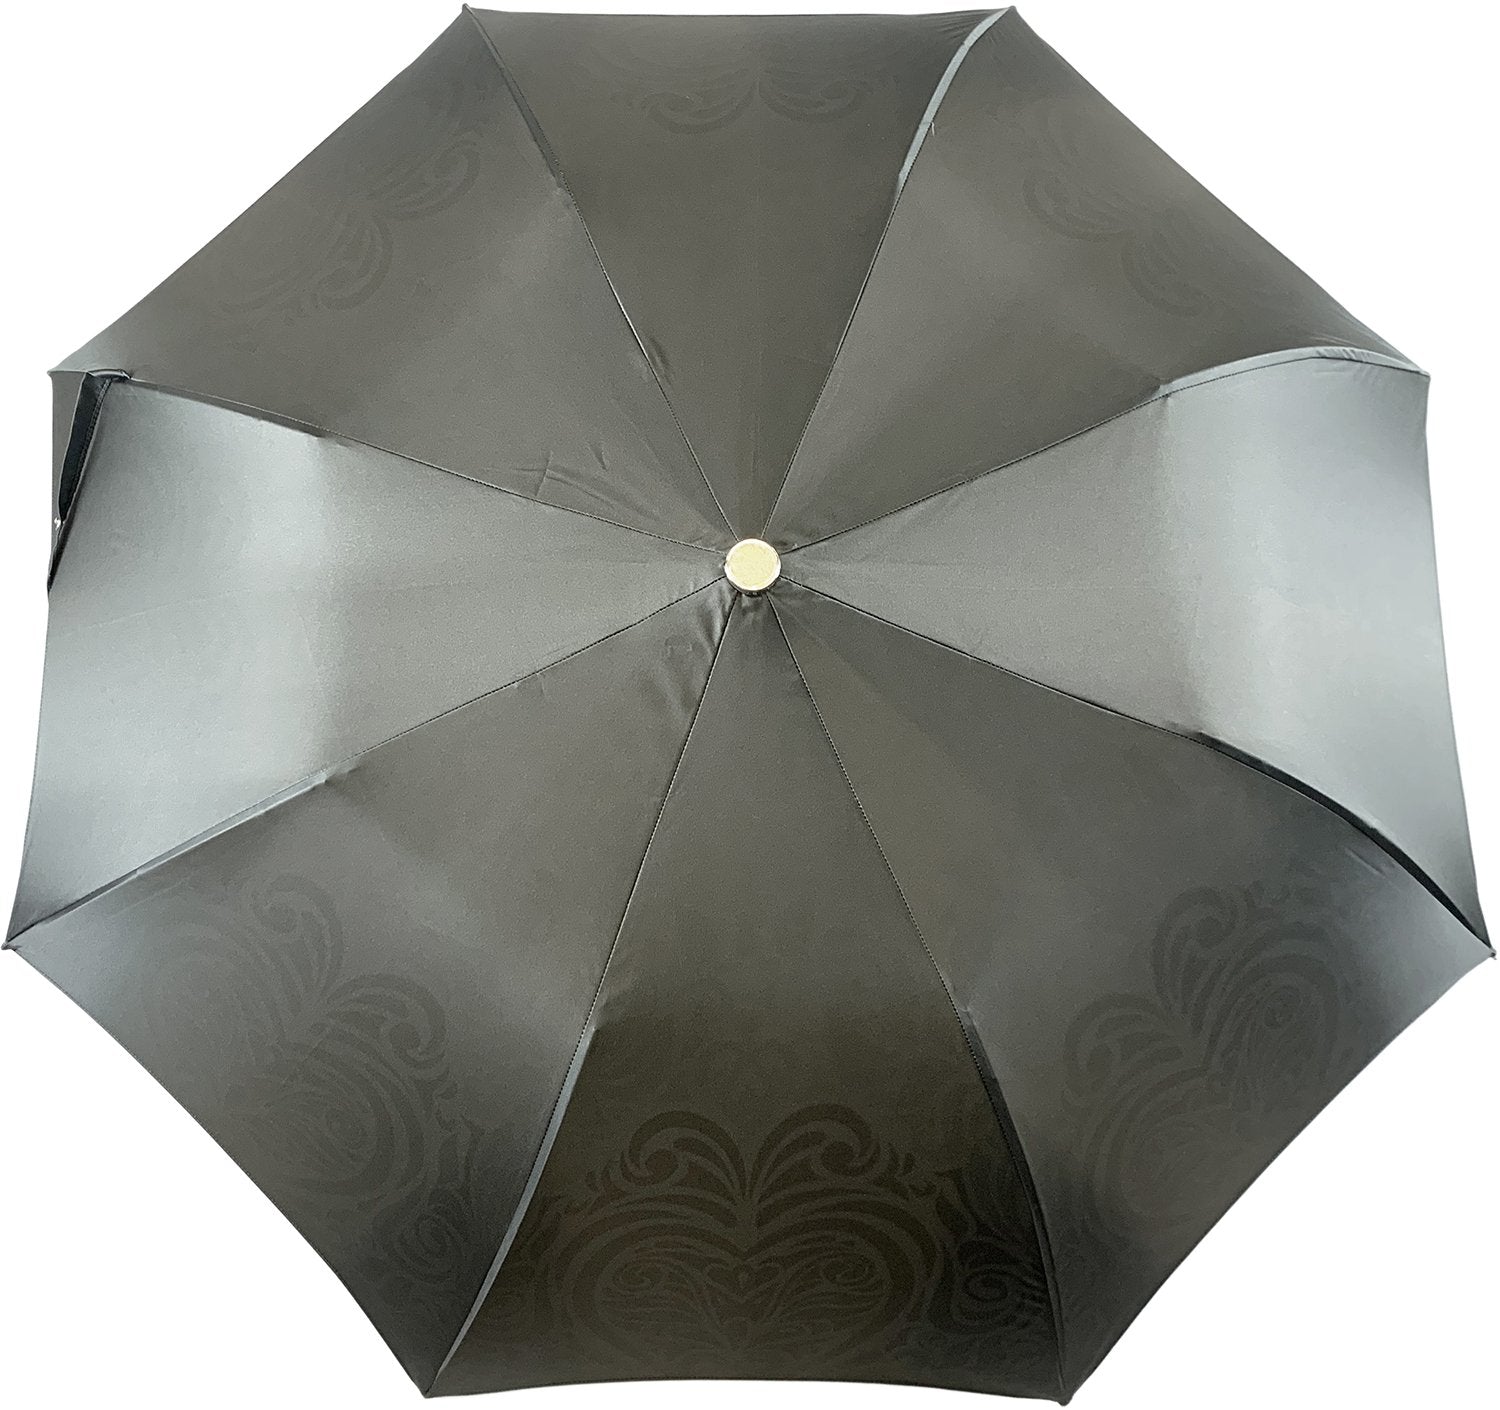 Damask Black and white with hundreds of crystals - IL MARCHESATO LUXURY UMBRELLAS, CANES AND SHOEHORNS